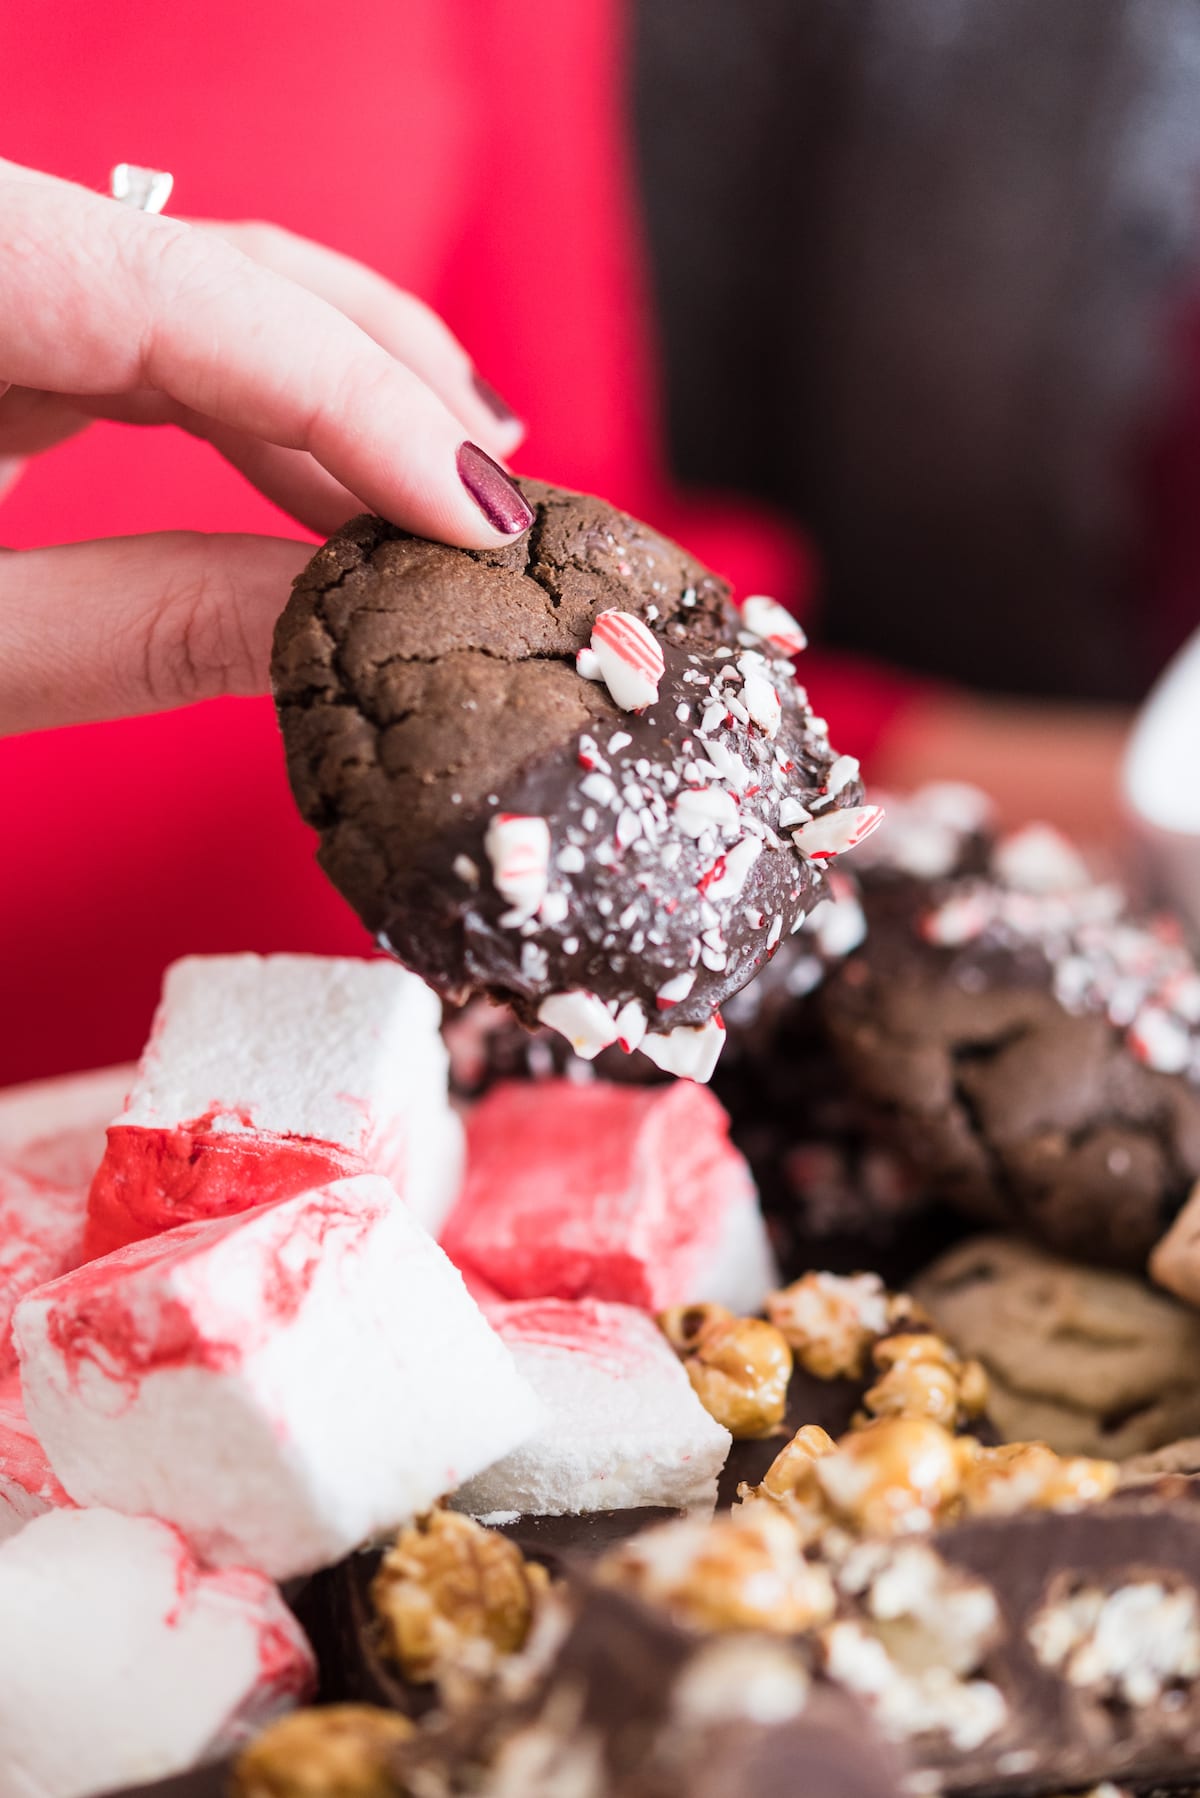 Elevate your yearly cookie platter game with an epic Christmas cookie board! Get the best Christmas cookie recipes, Christmas party ideas, entertaining tips, Christmas cocktails and more from entertaining blog @cydconverse